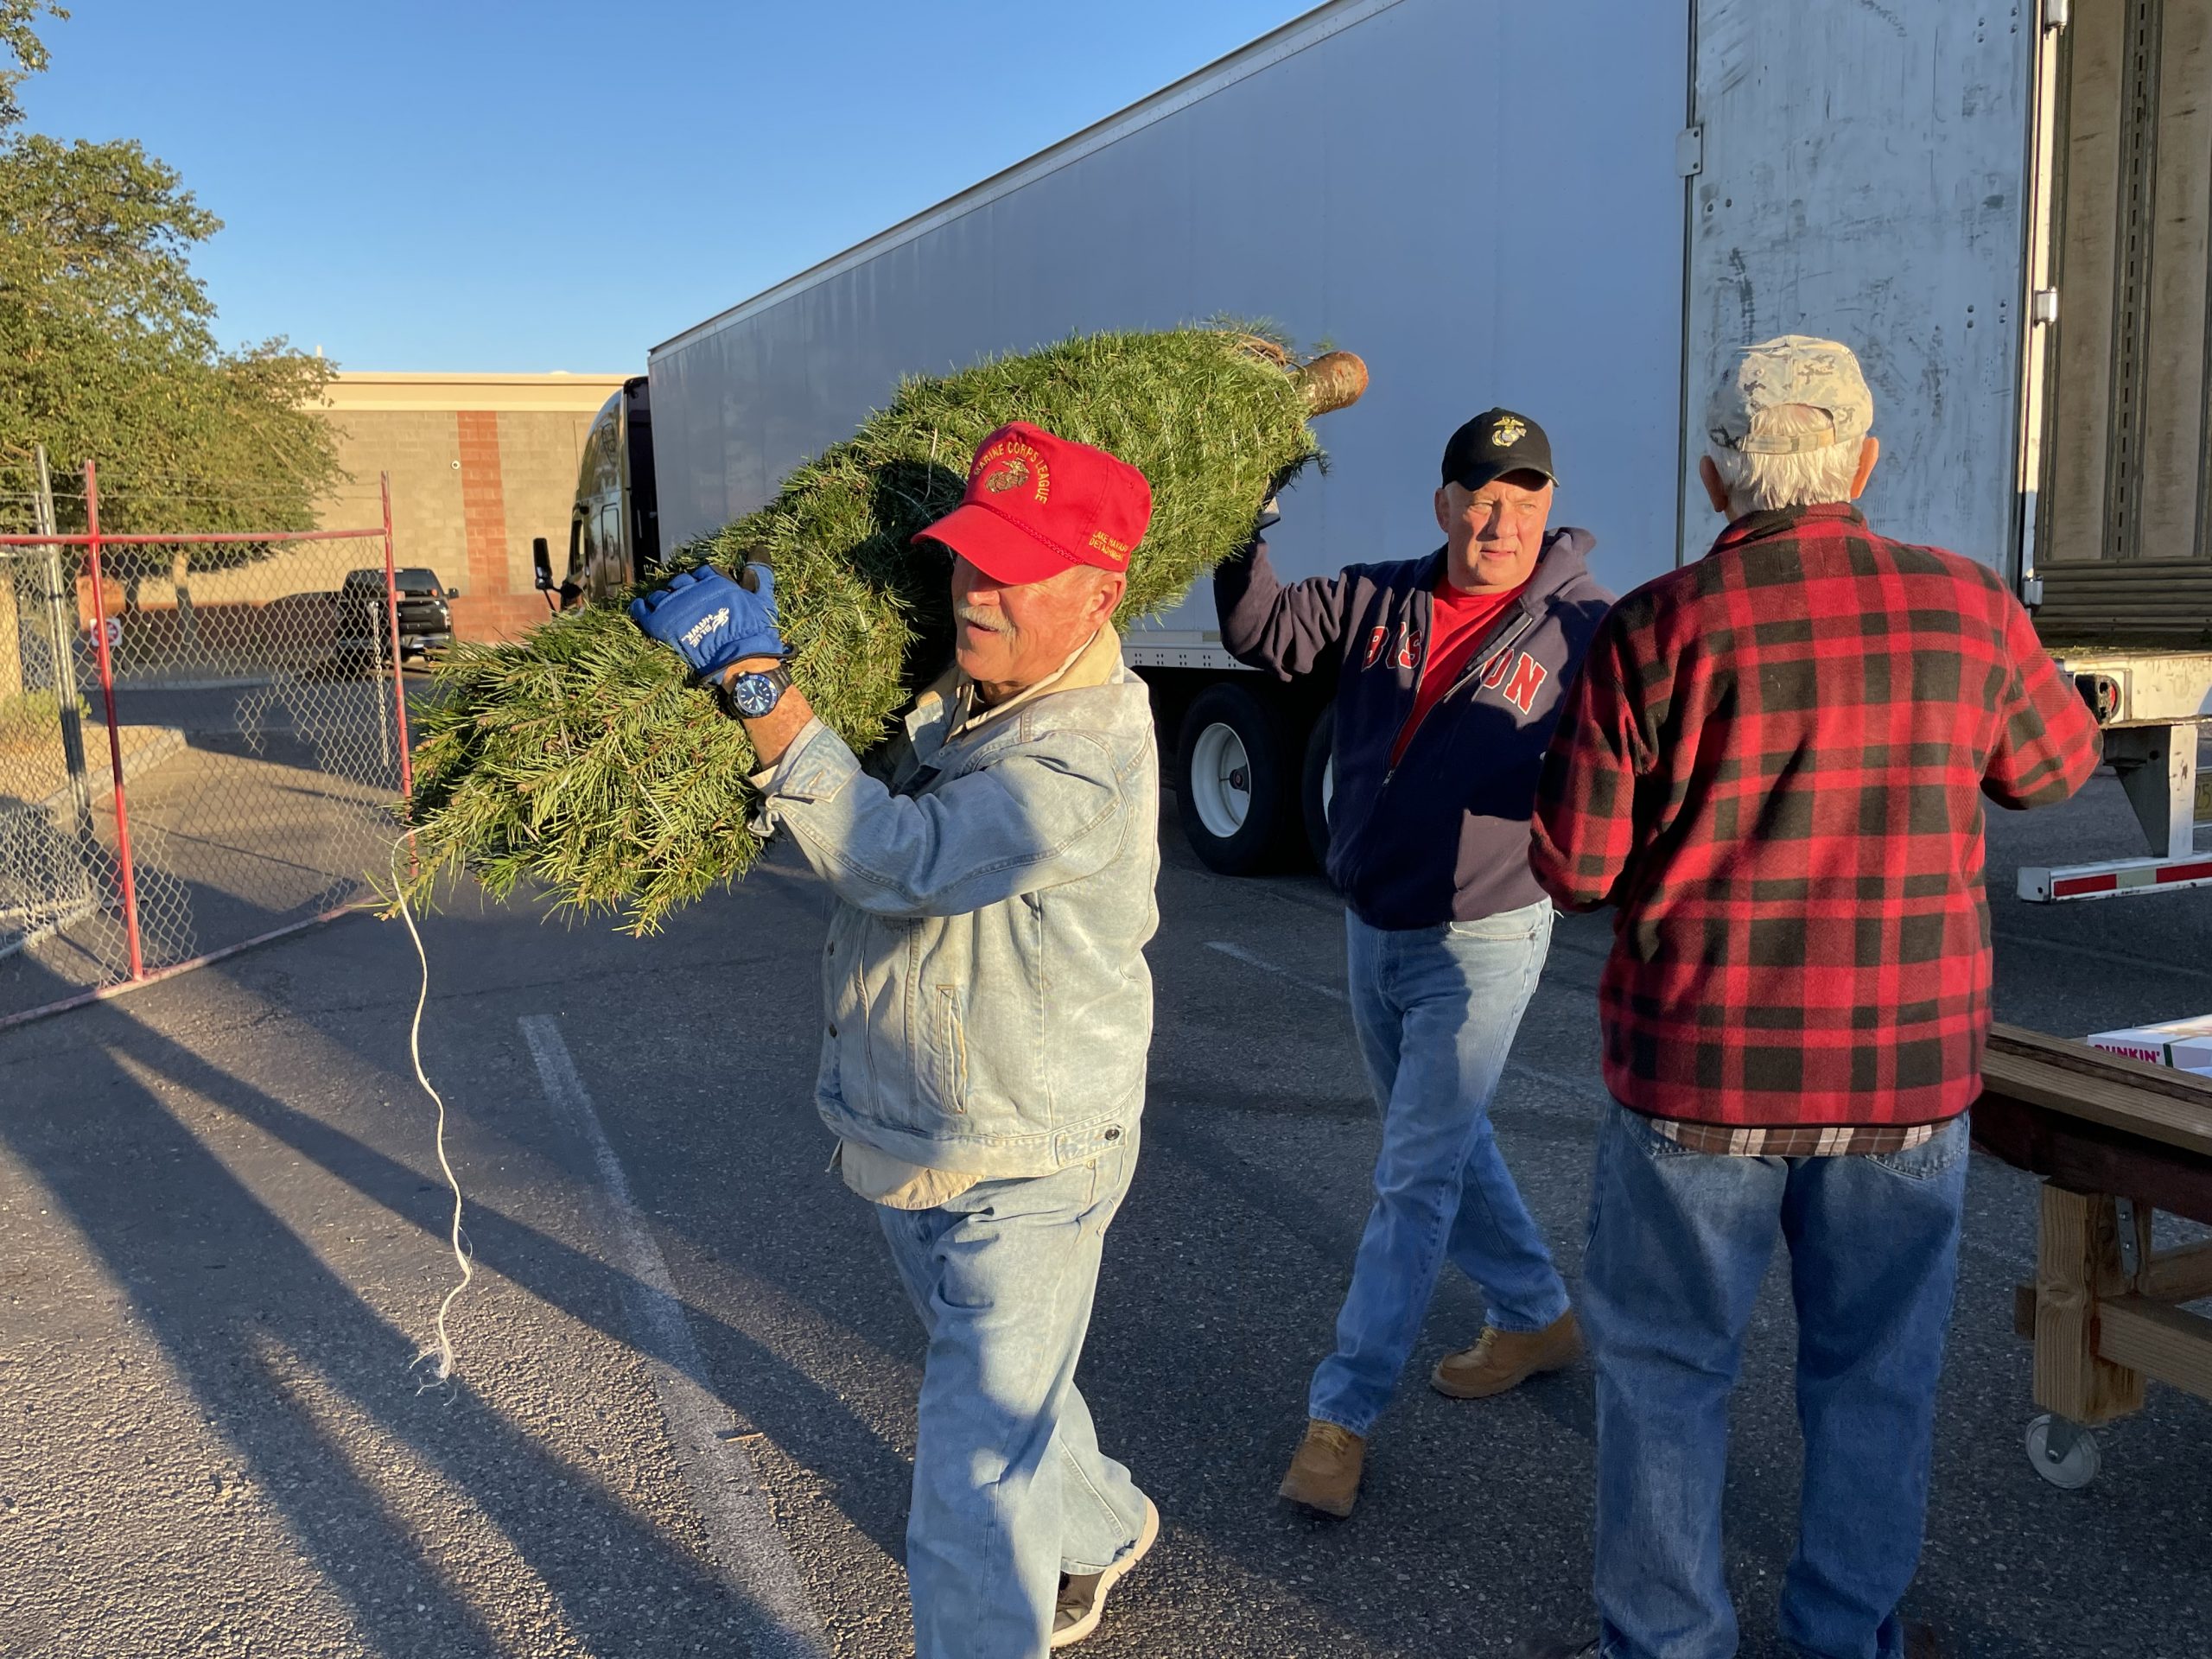 Marine Corps League Sets Up Shop Offering Live Christmas Trees